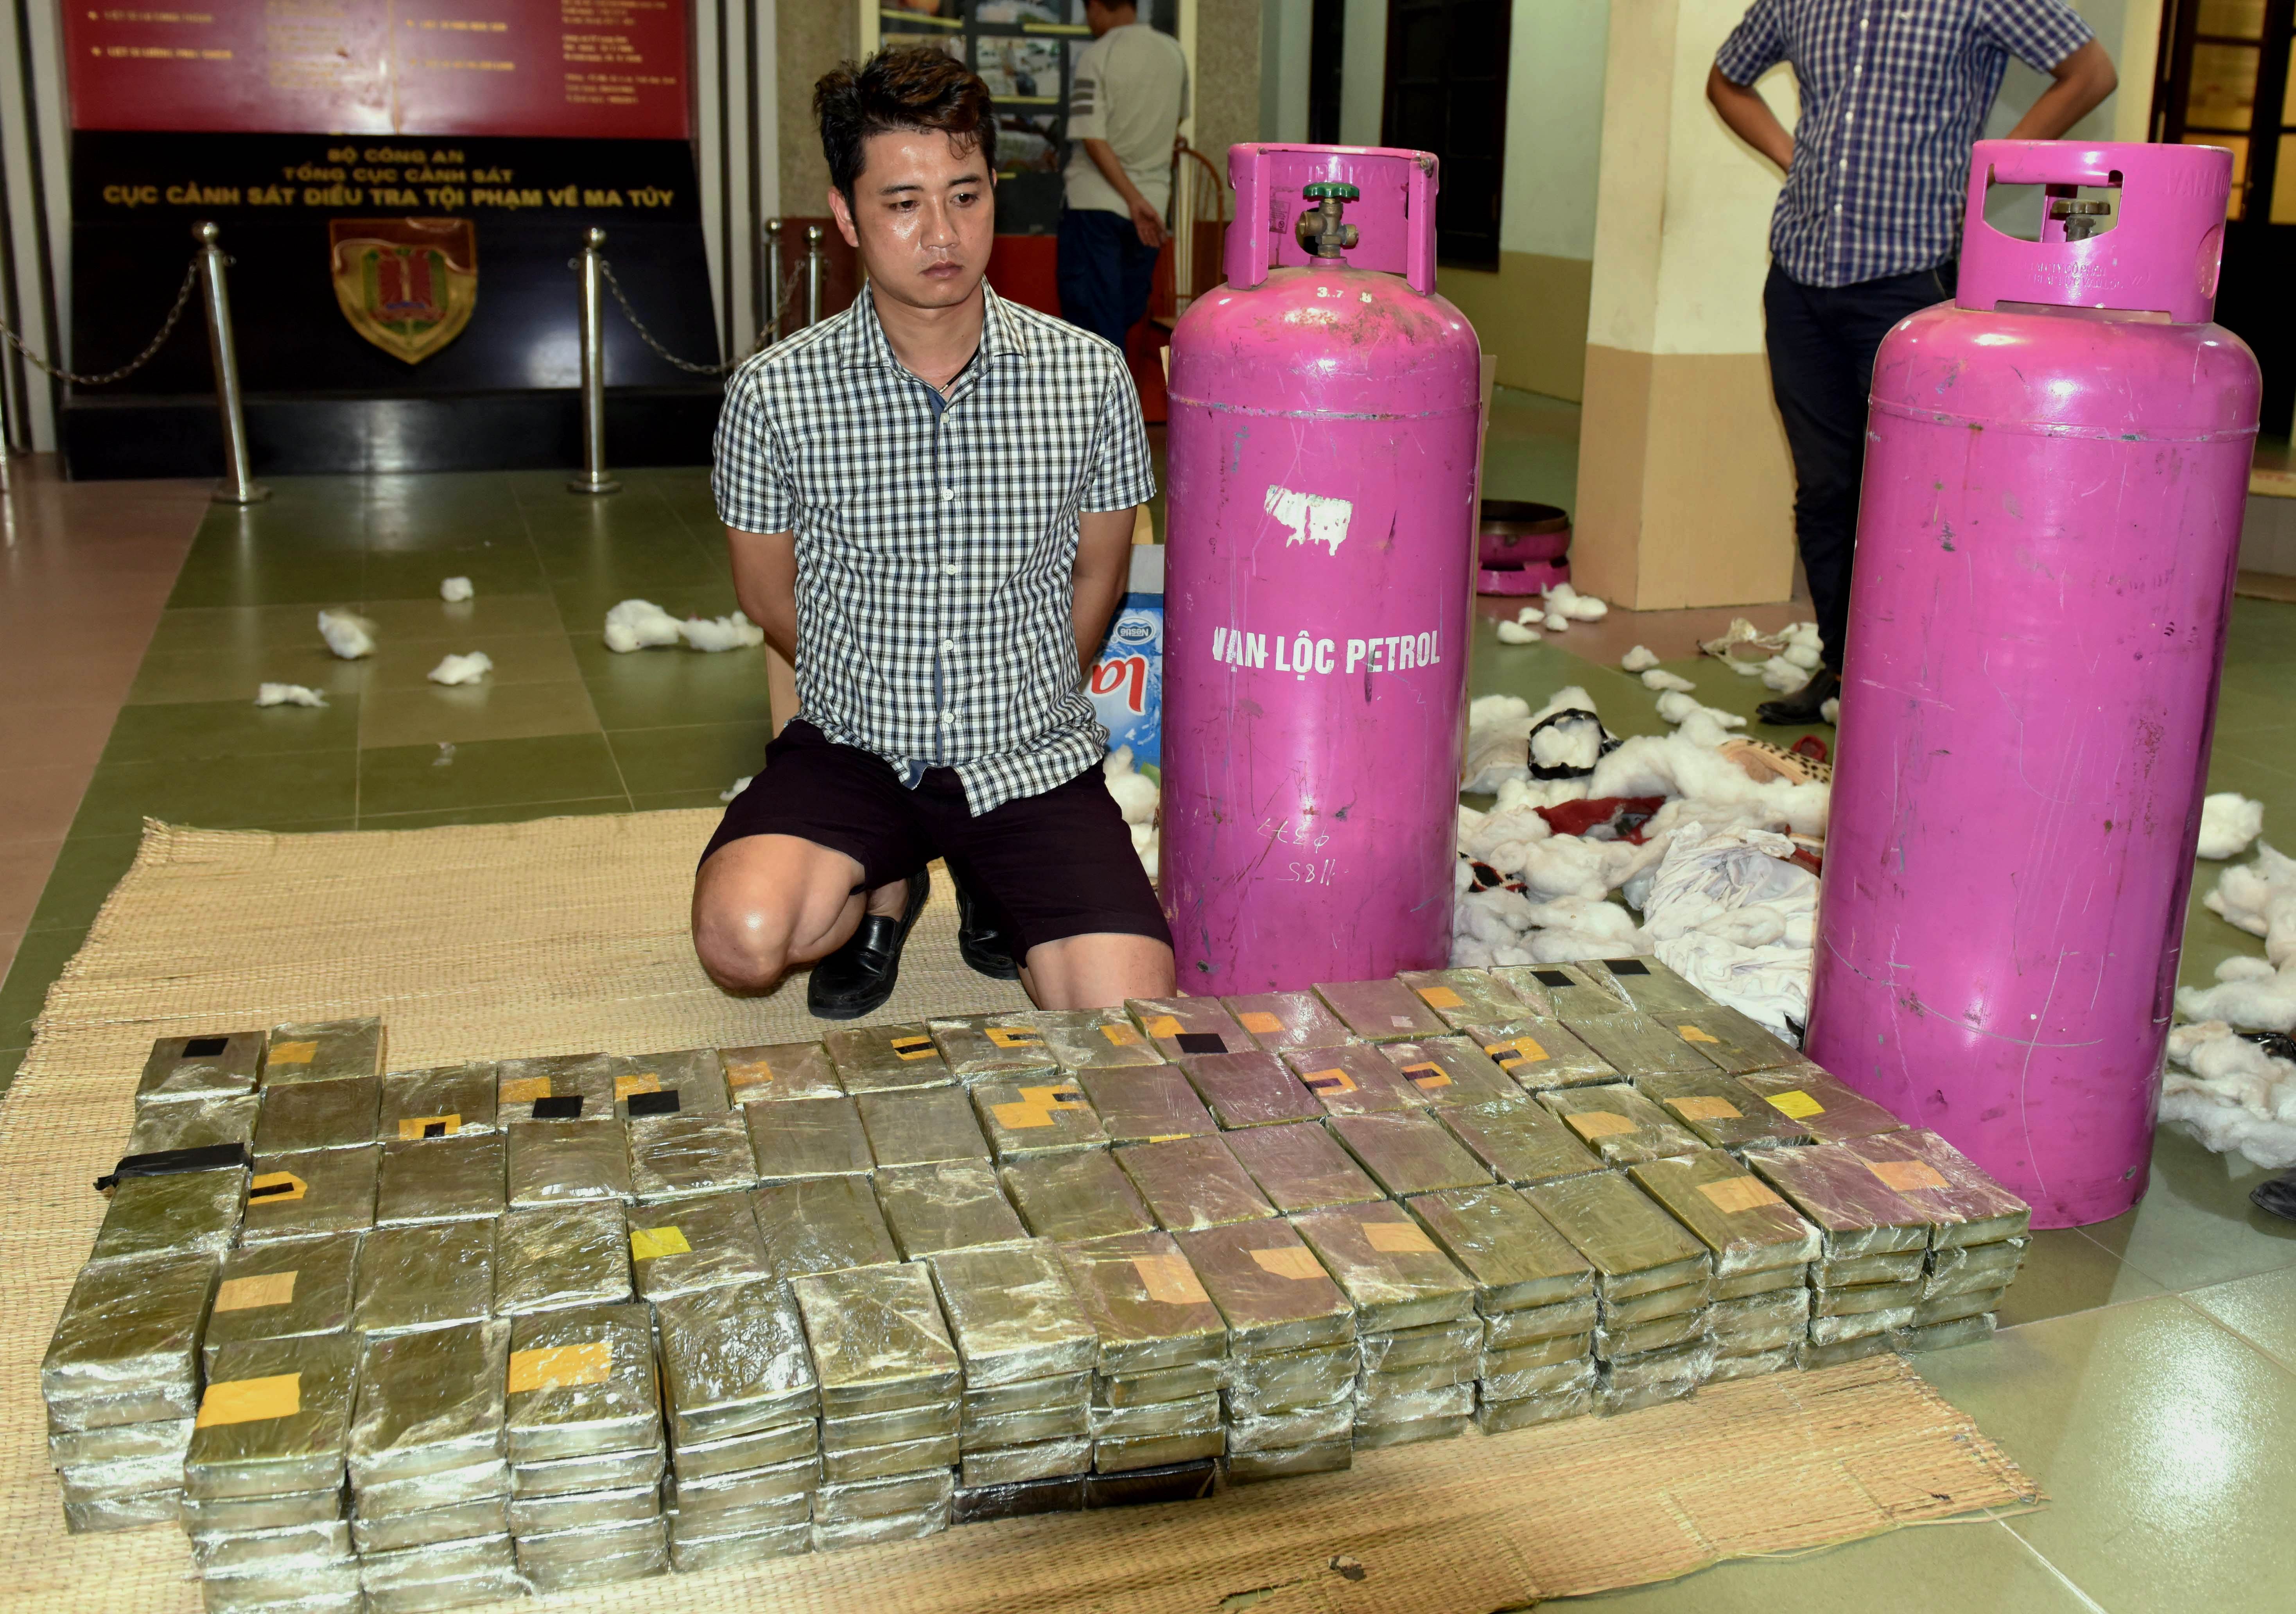 This picture from the Vietnam News Agency taken on July 26, 2015 shows arrested drug trafficker Nguyen Quoc Hung, 32, posing with the seized contraband at the anti-narcotics police department in Hanoi.  Photo: AFP/Vietnam News Agency